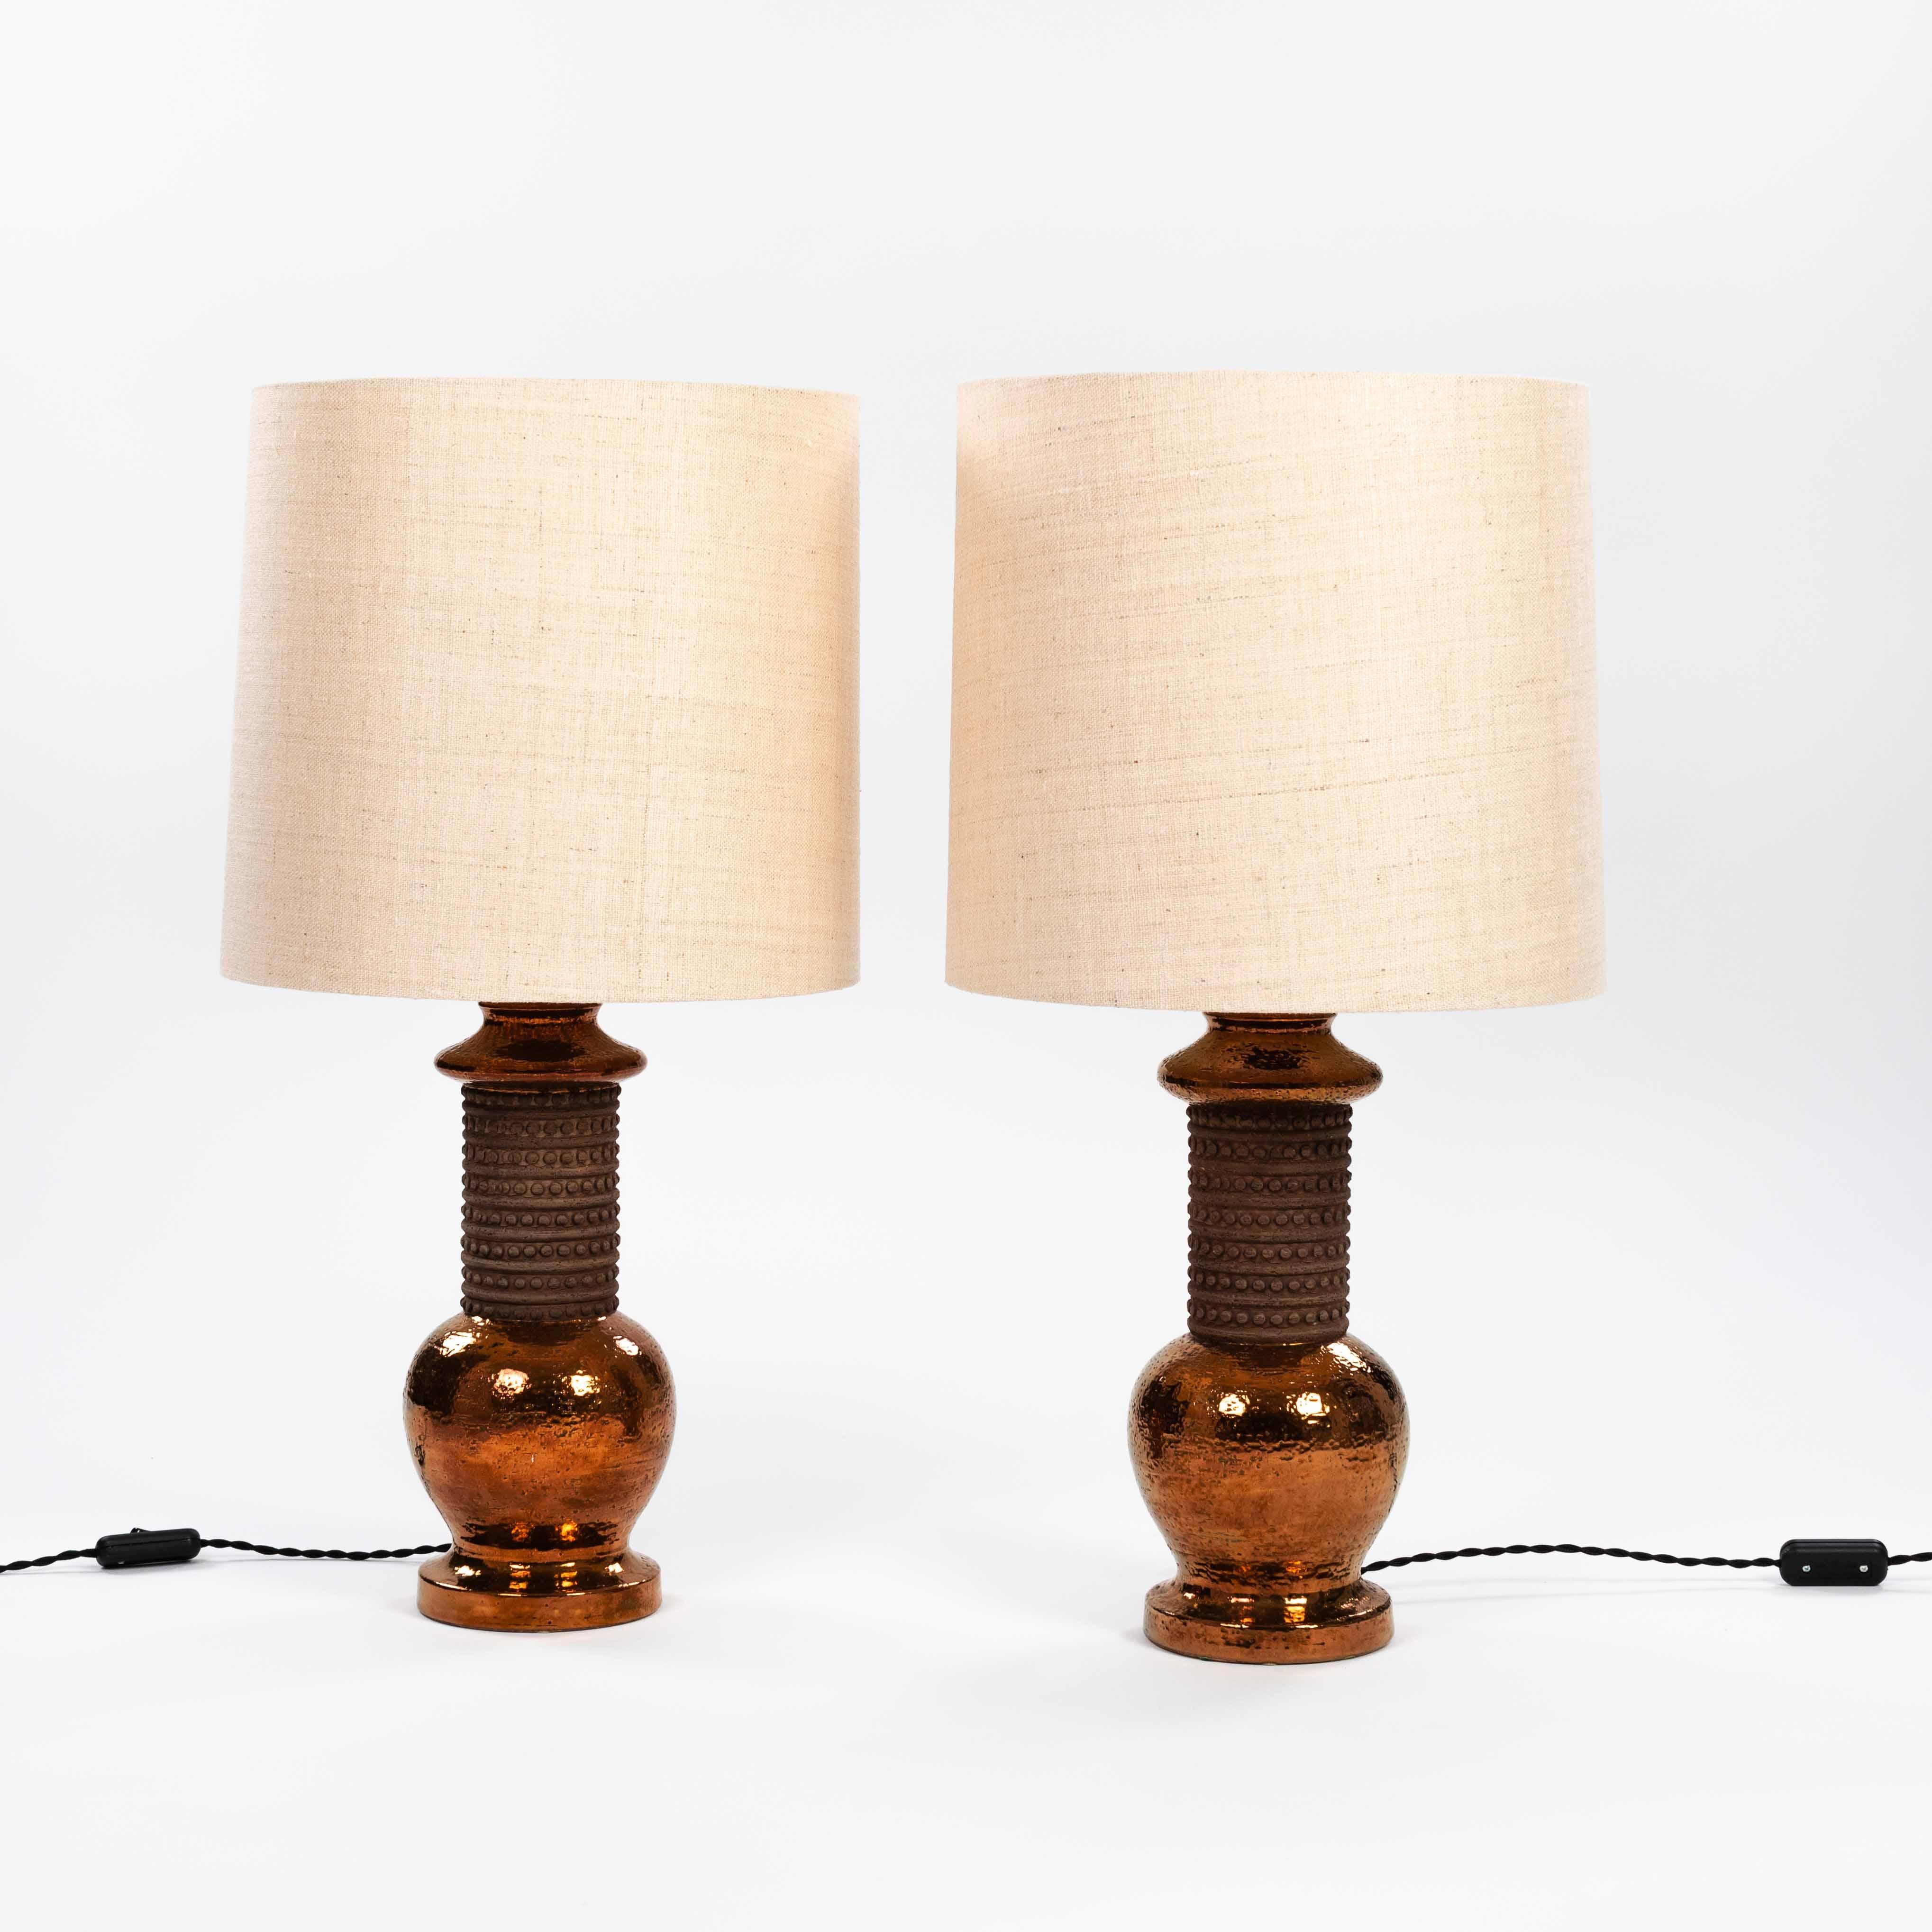 Elegant, rustic pair of table lamps in ceramic with copper glaze by Bergboms AB Sweden for Bitossi Italy 1960s. 
Beautifully shaped design with matte open pore ceramic center and copper colored glaze of round lamp base and lamp neck. 
Brown earthen